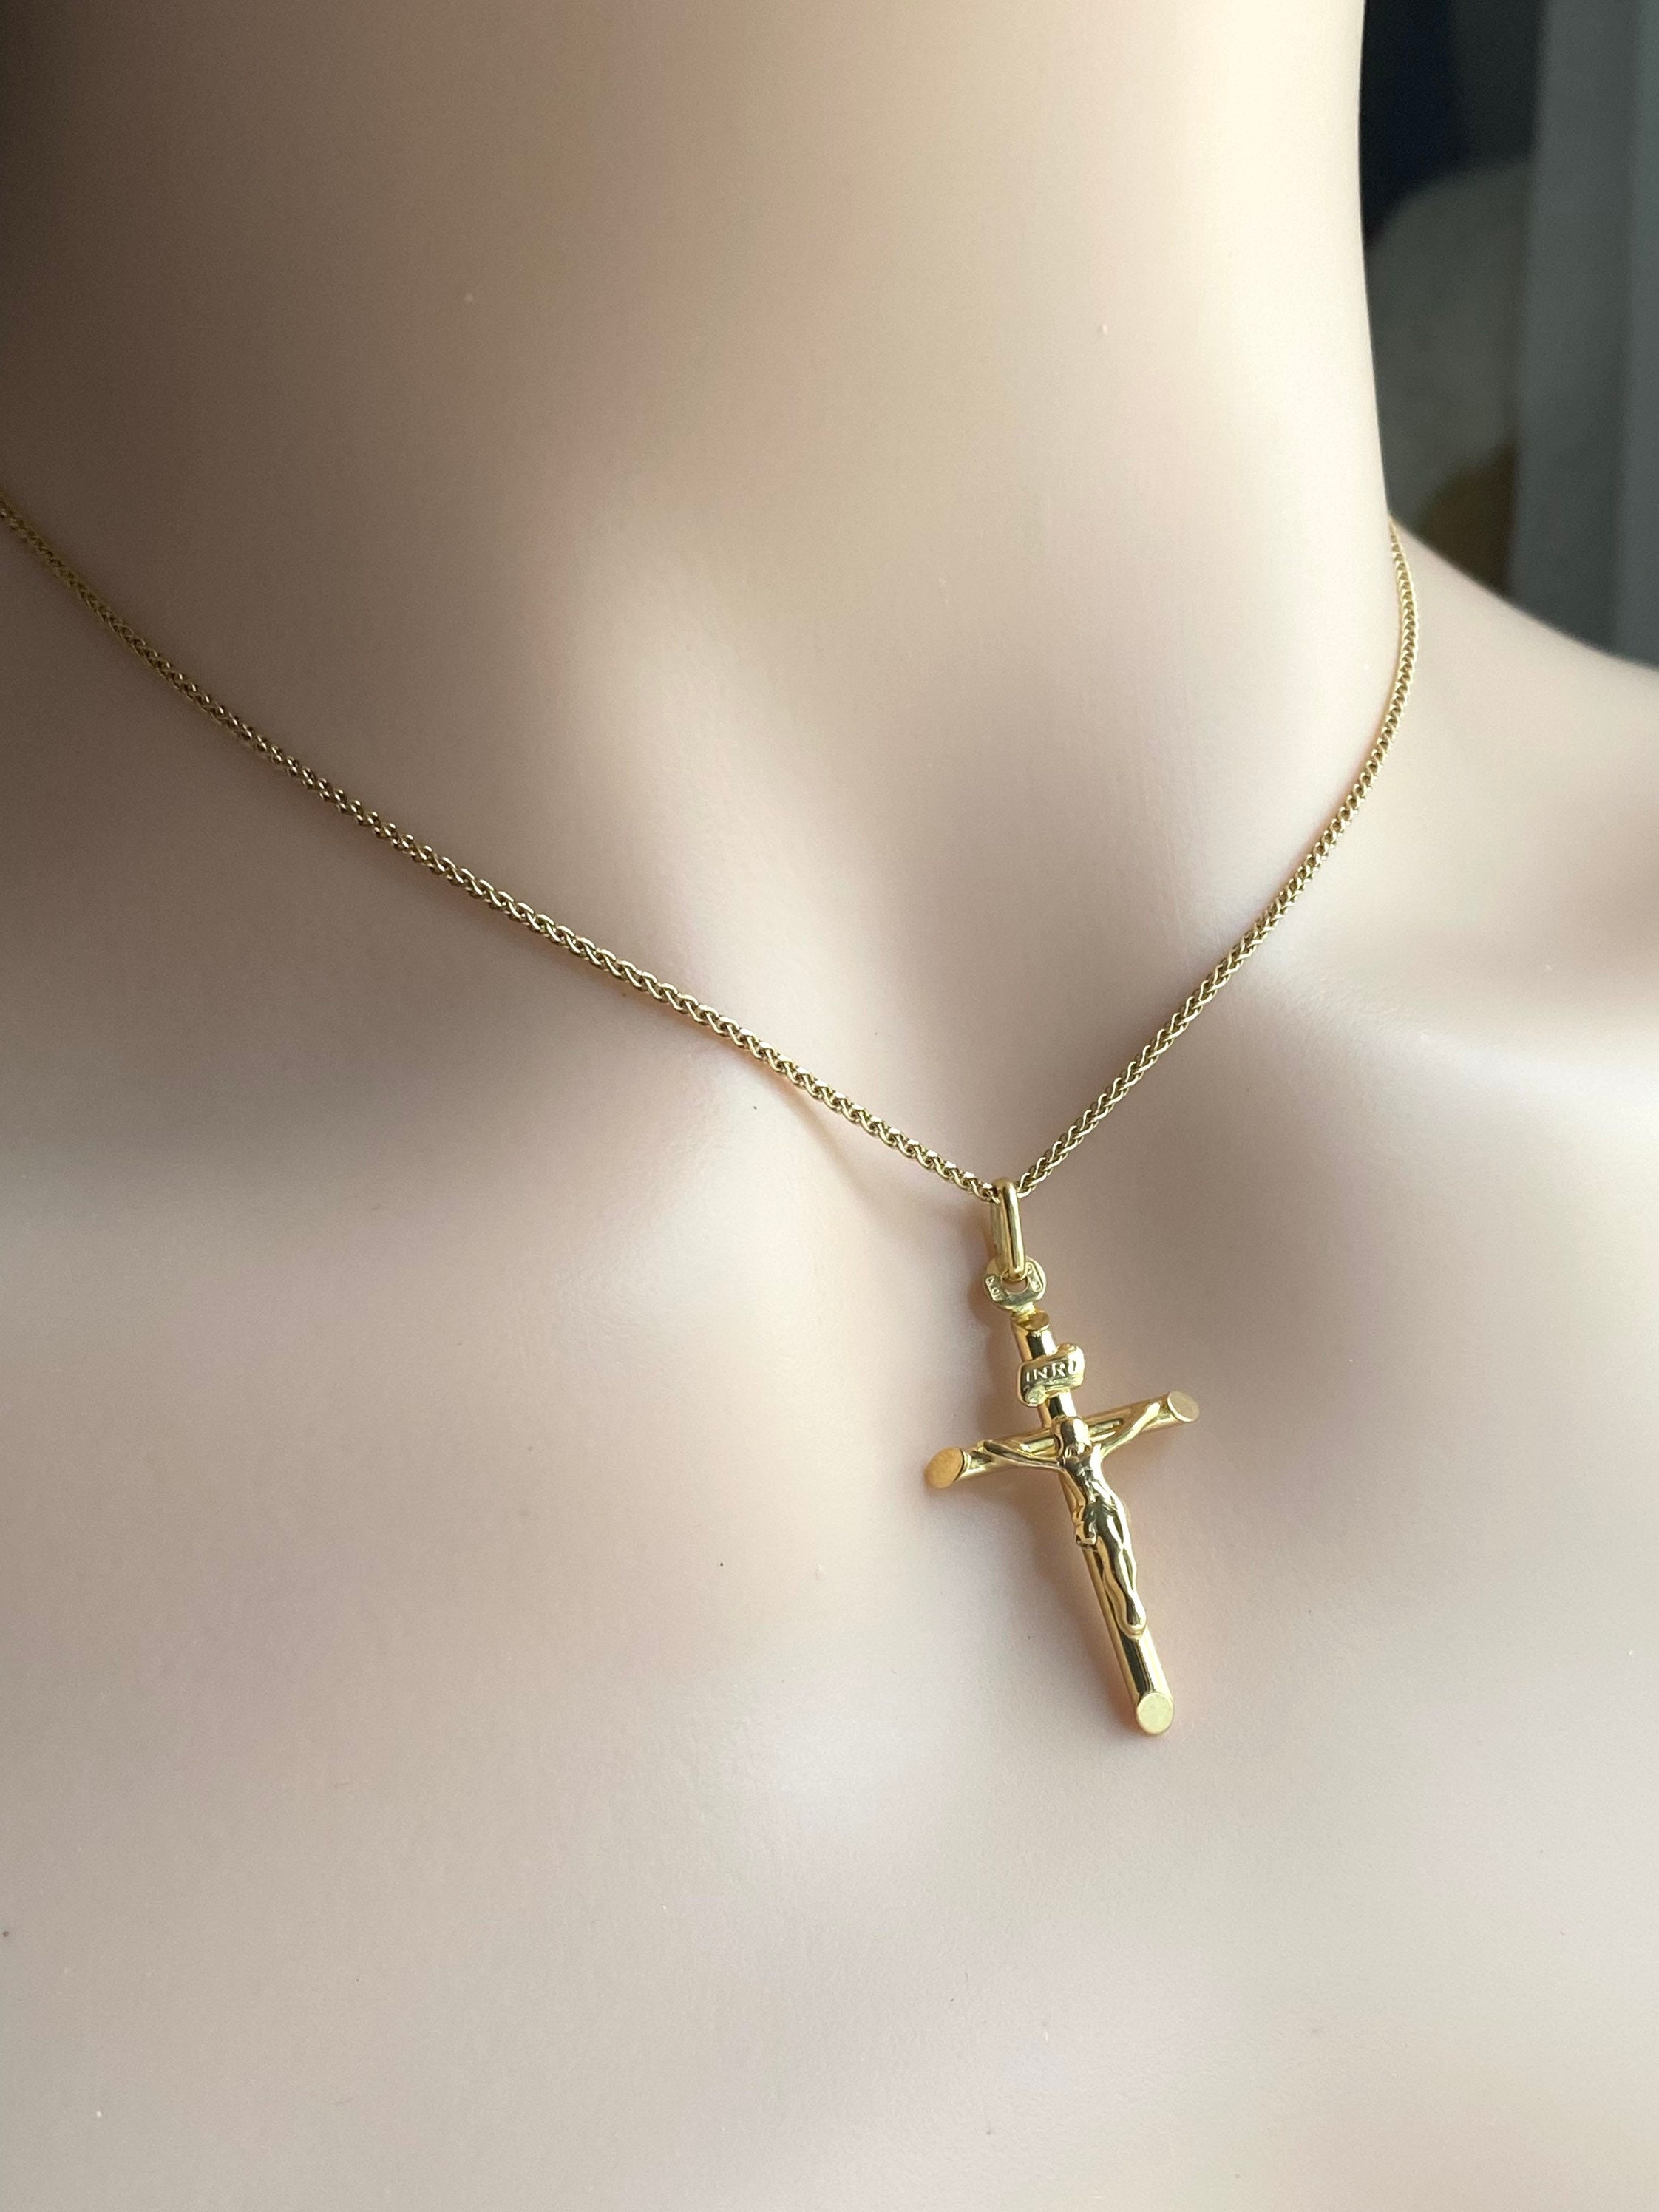 Personalized cross necklace, Initial Gold fill Necklace, Baptism necklace, Baby  Christening jewelery, First communion necklace